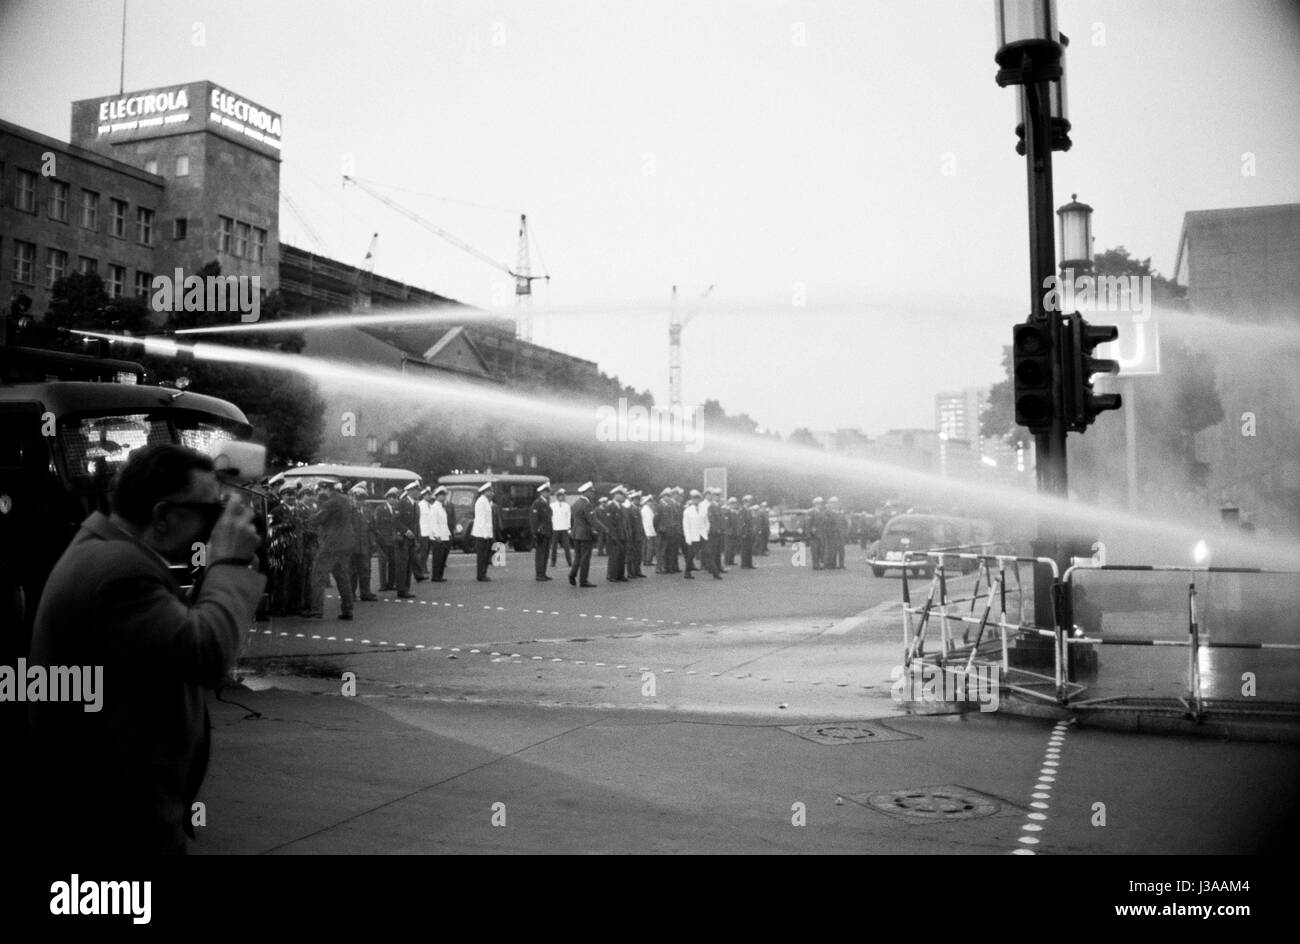 Police forces are using water canons in Berlin, 1967 Stock Photo